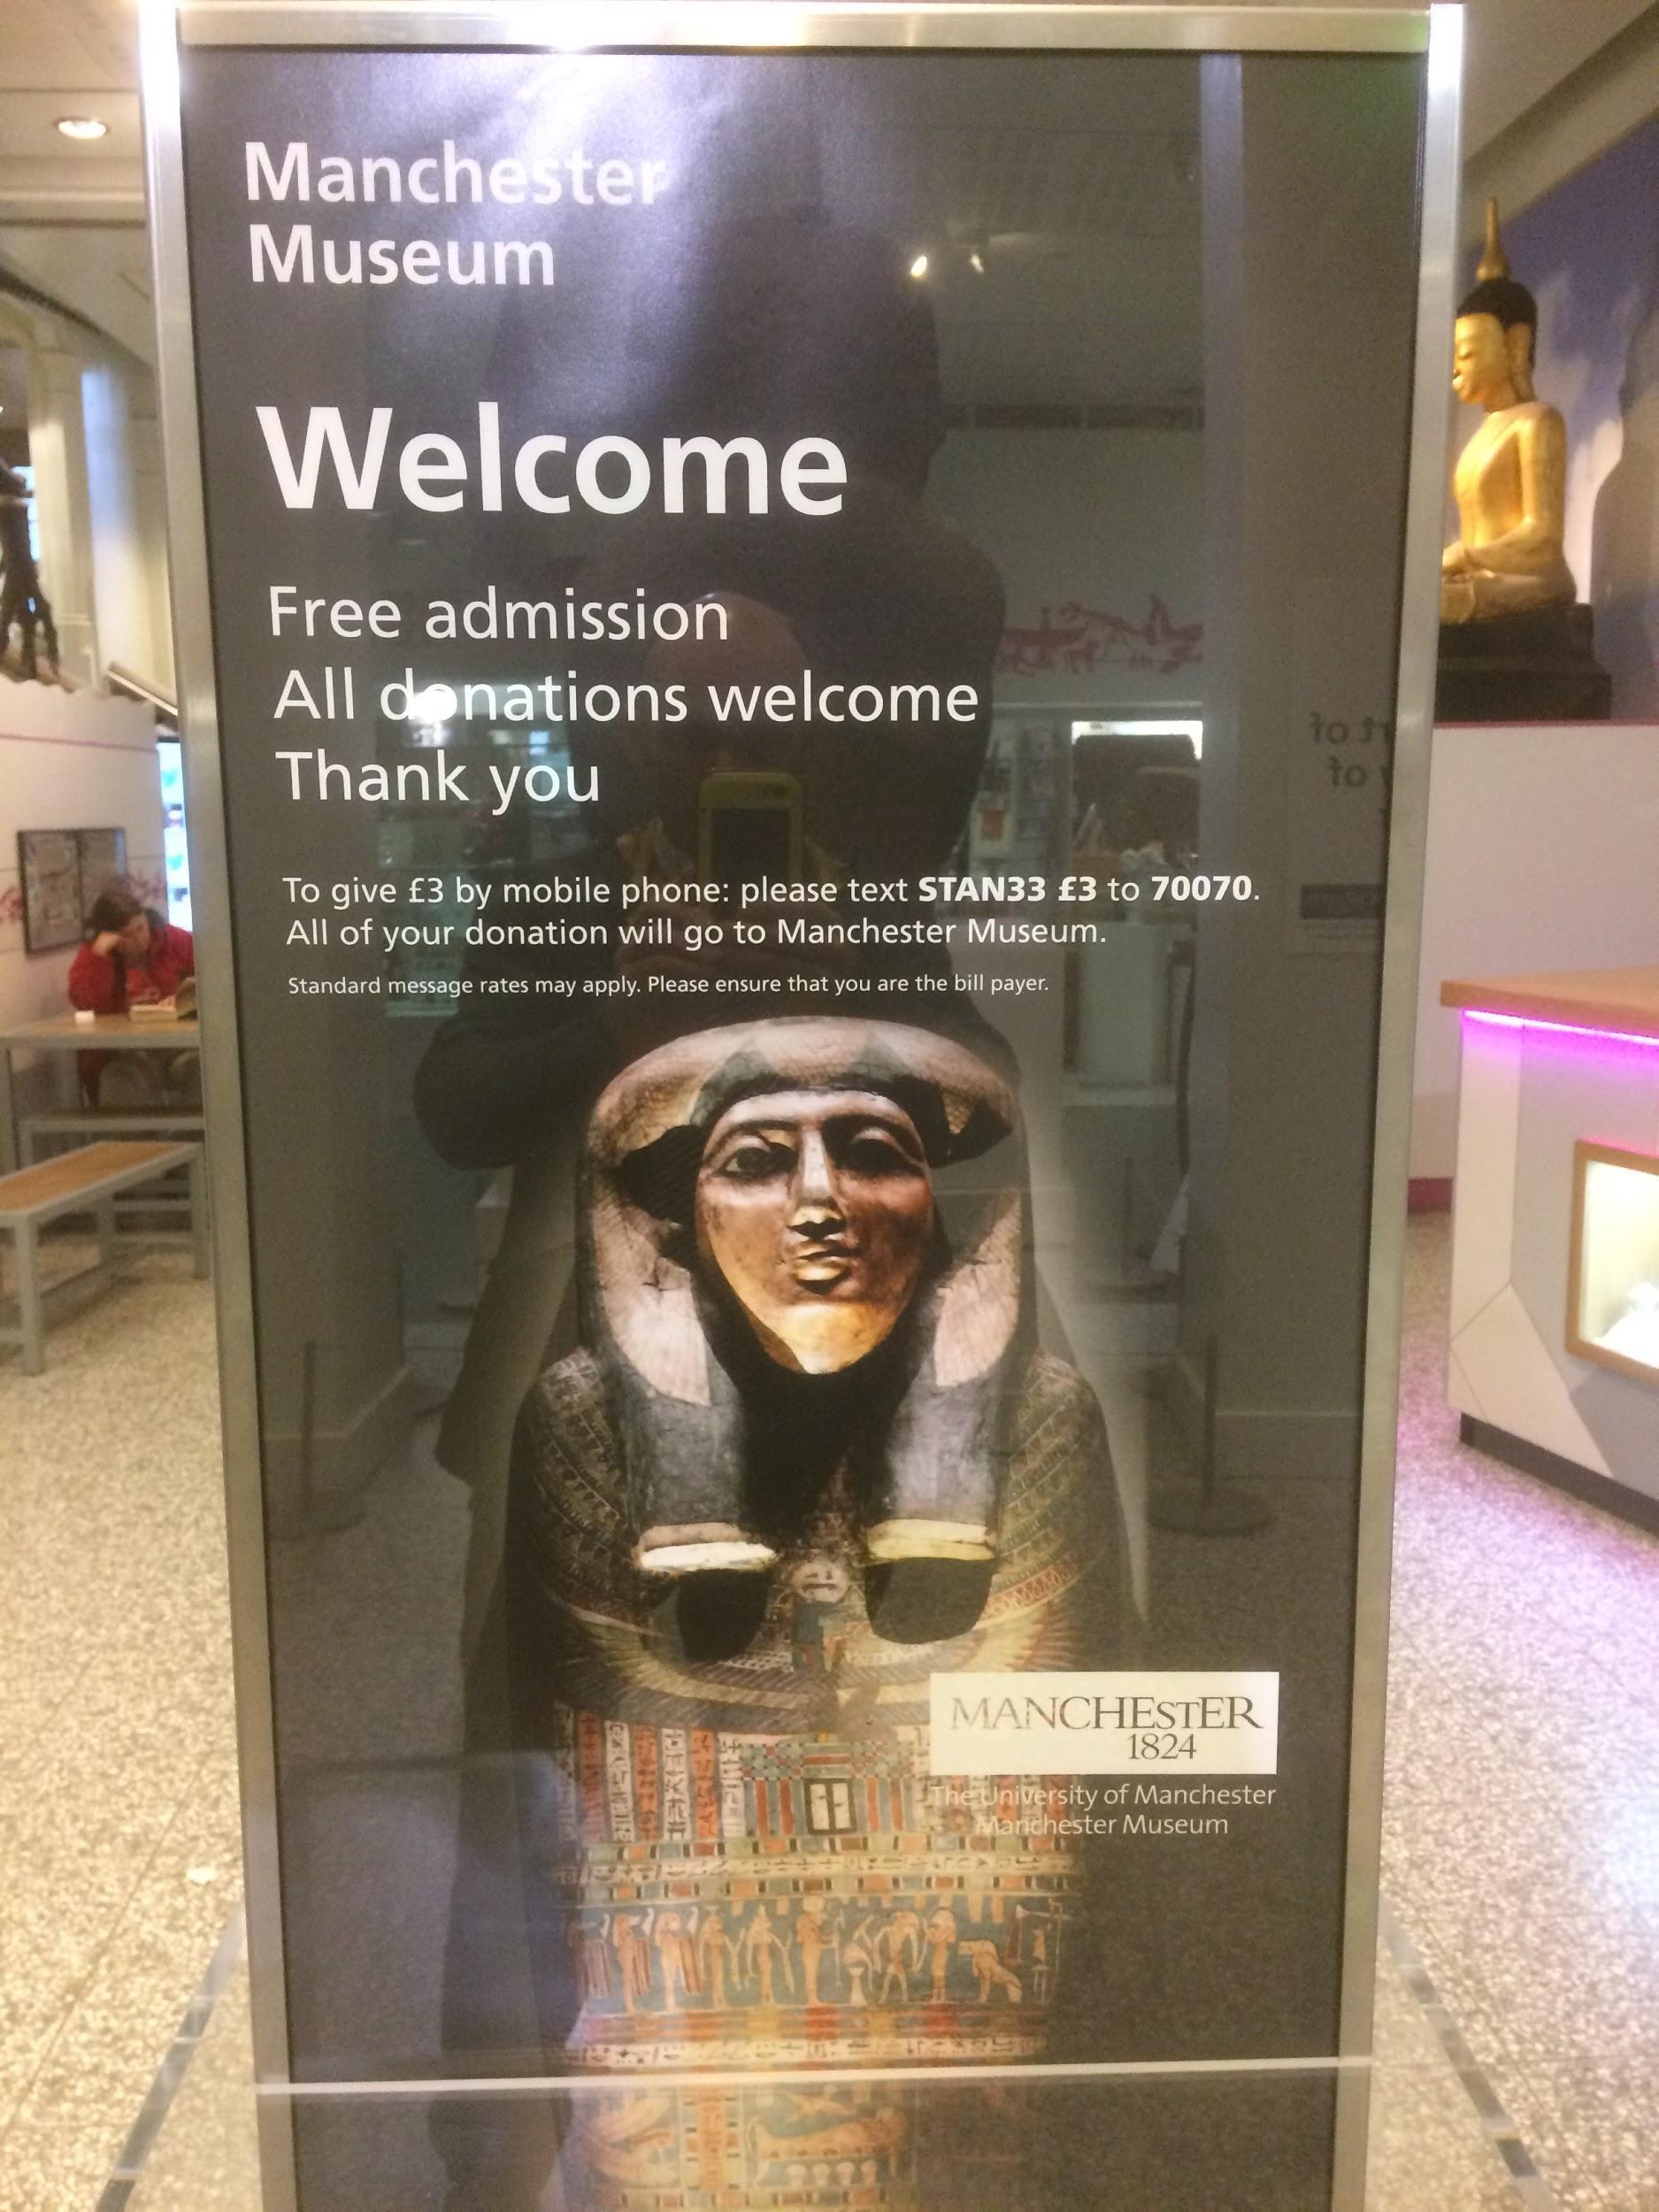 A museum placard invites people into the museum for free.